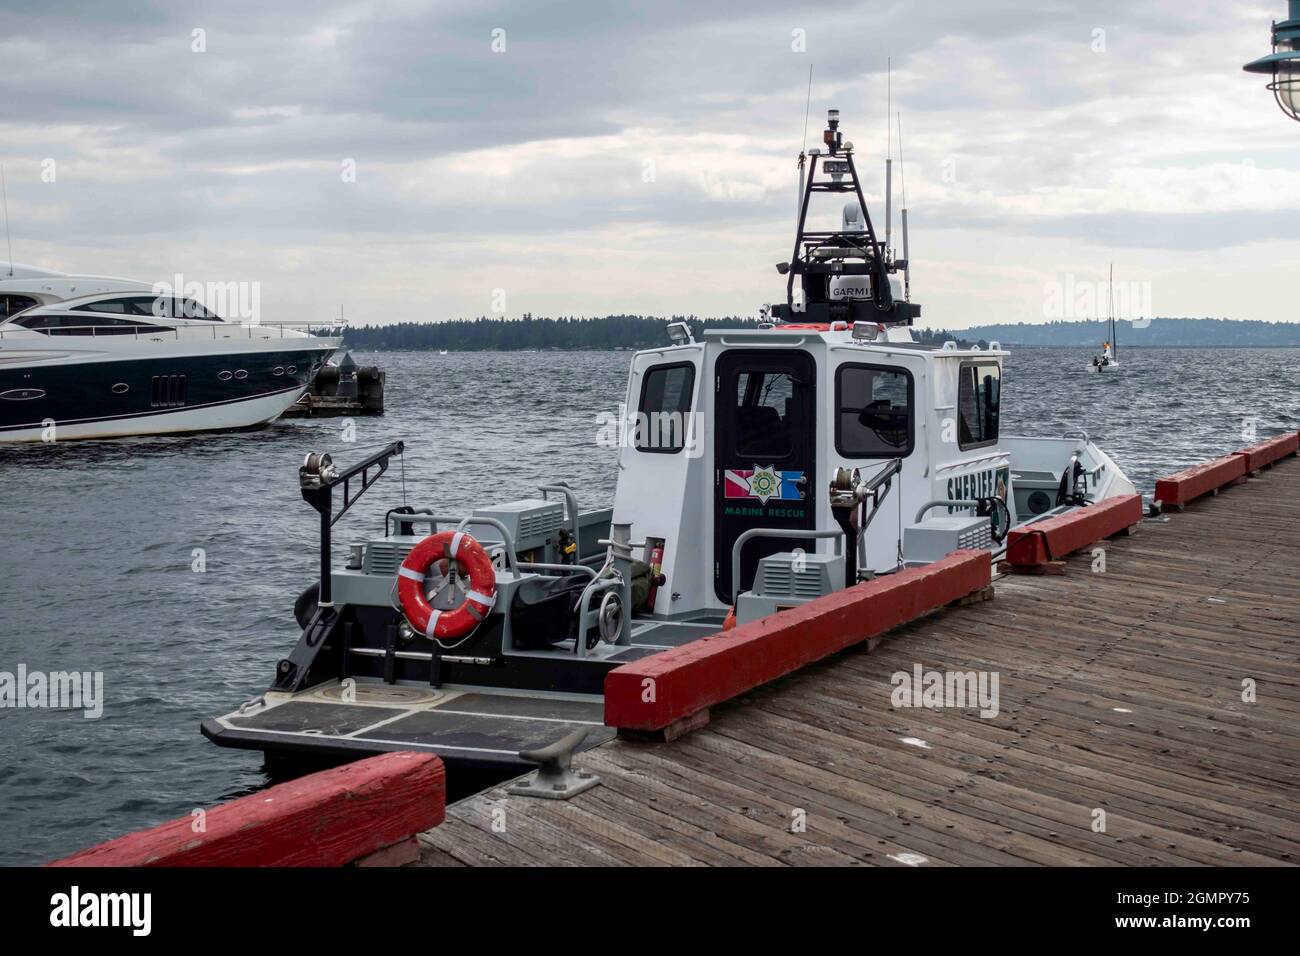 Kirkland, WA USA - circa August 2021: View of the King County Sheriff Marine Rescue boat parked at the dock Stock Photo